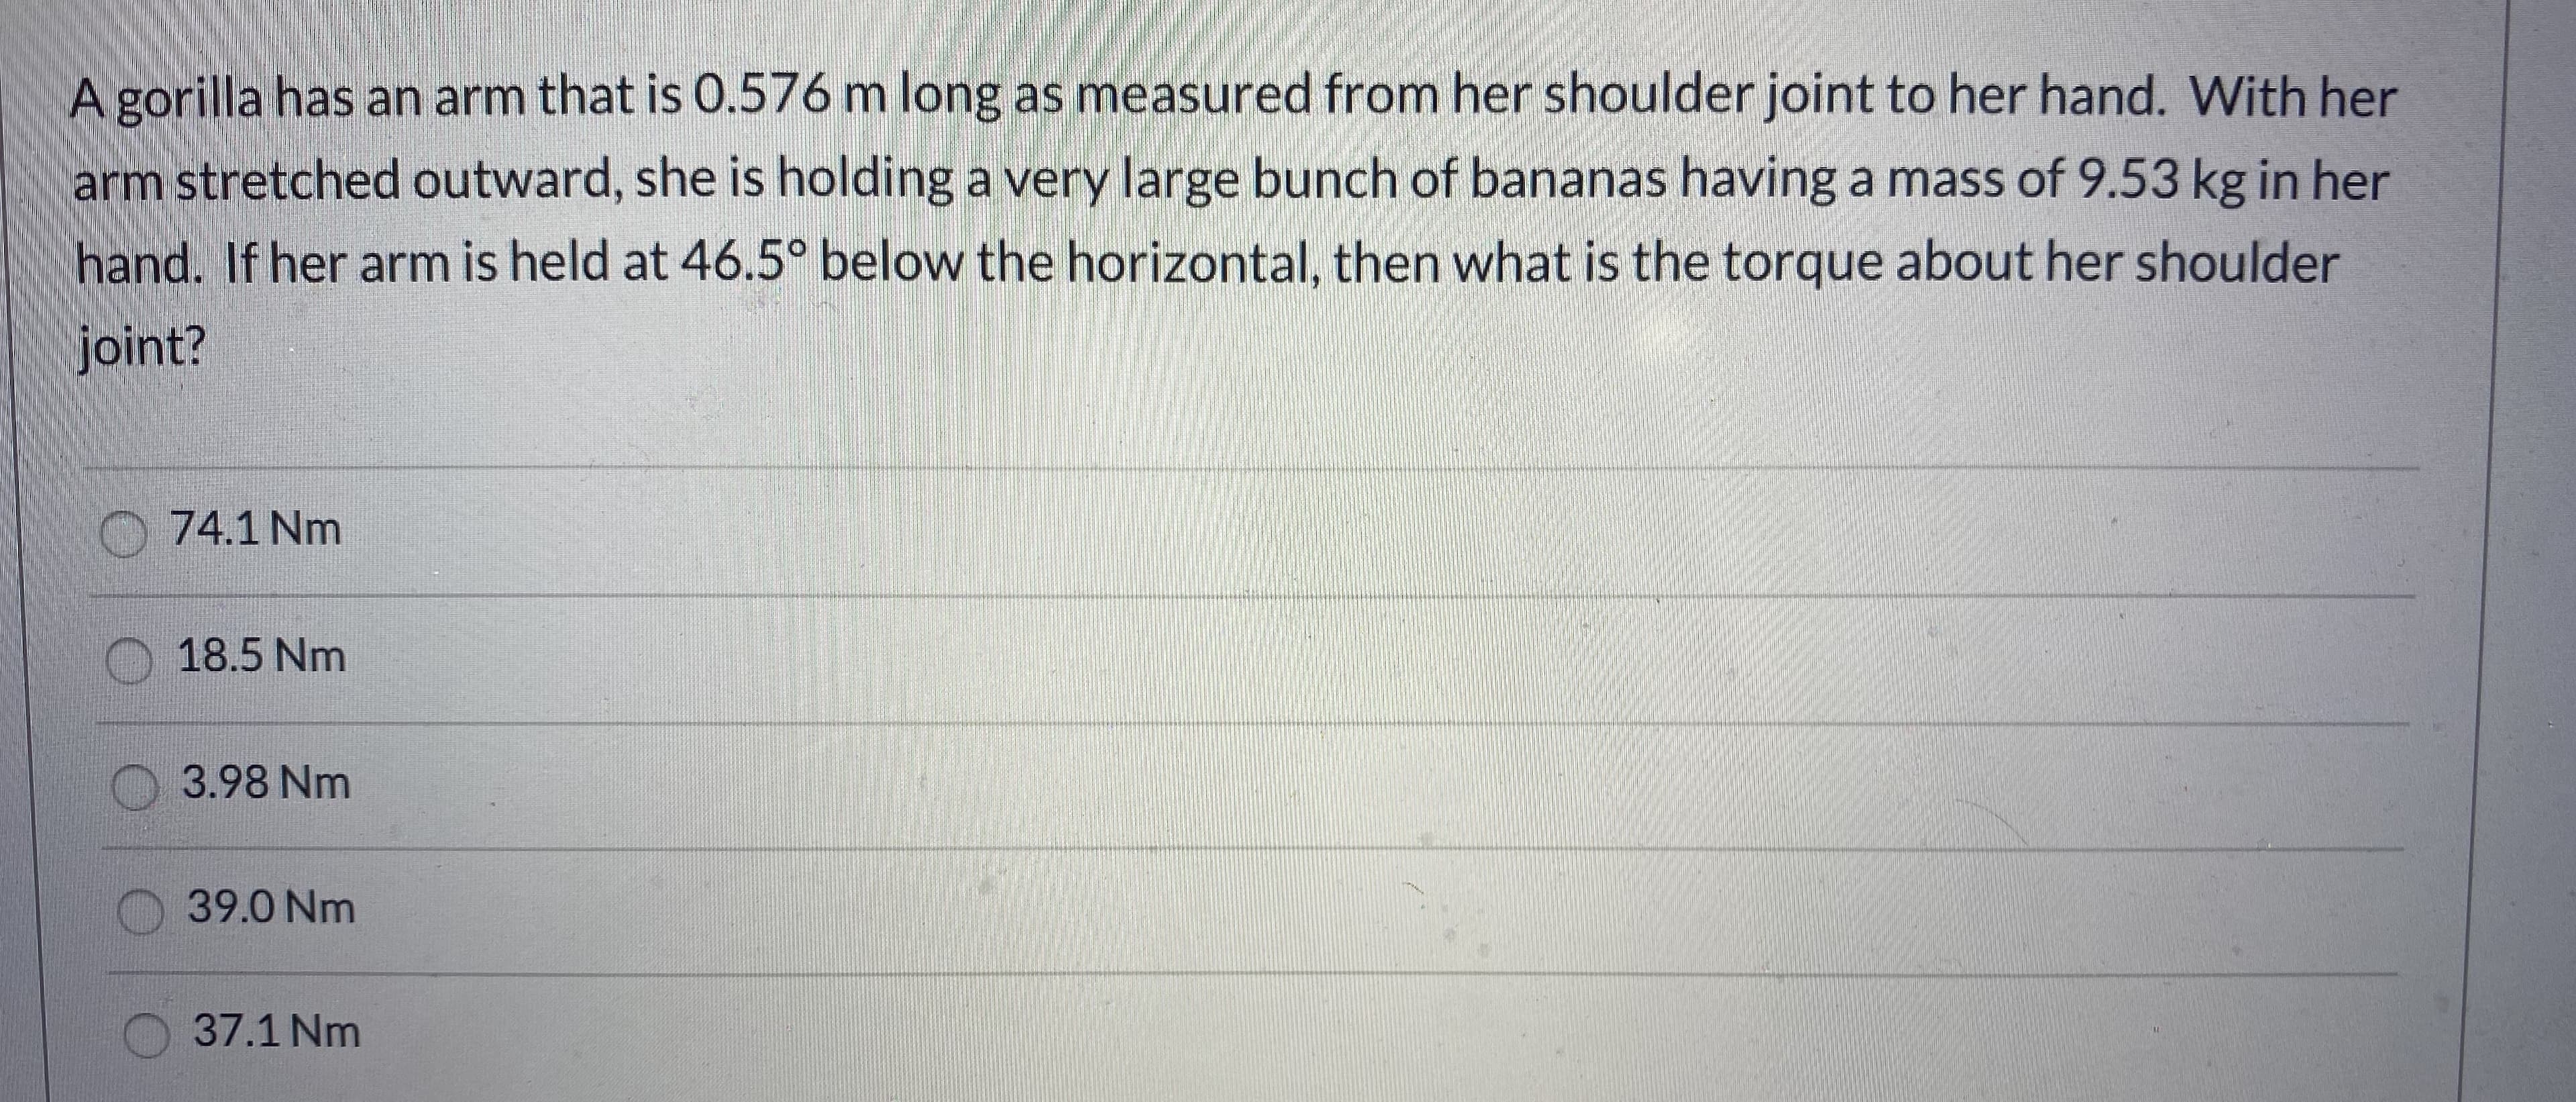 A gorilla has an arm that is 0.576 m long as measured from her shoulder joint to her hand. With her
arm stretched outward, she is holding a very large bunch of bananas having a mass of 9.53 kg in her
hand. If her arm is held at 46.5° below the horizontal, then what is the torque about her shoulder
joint?
